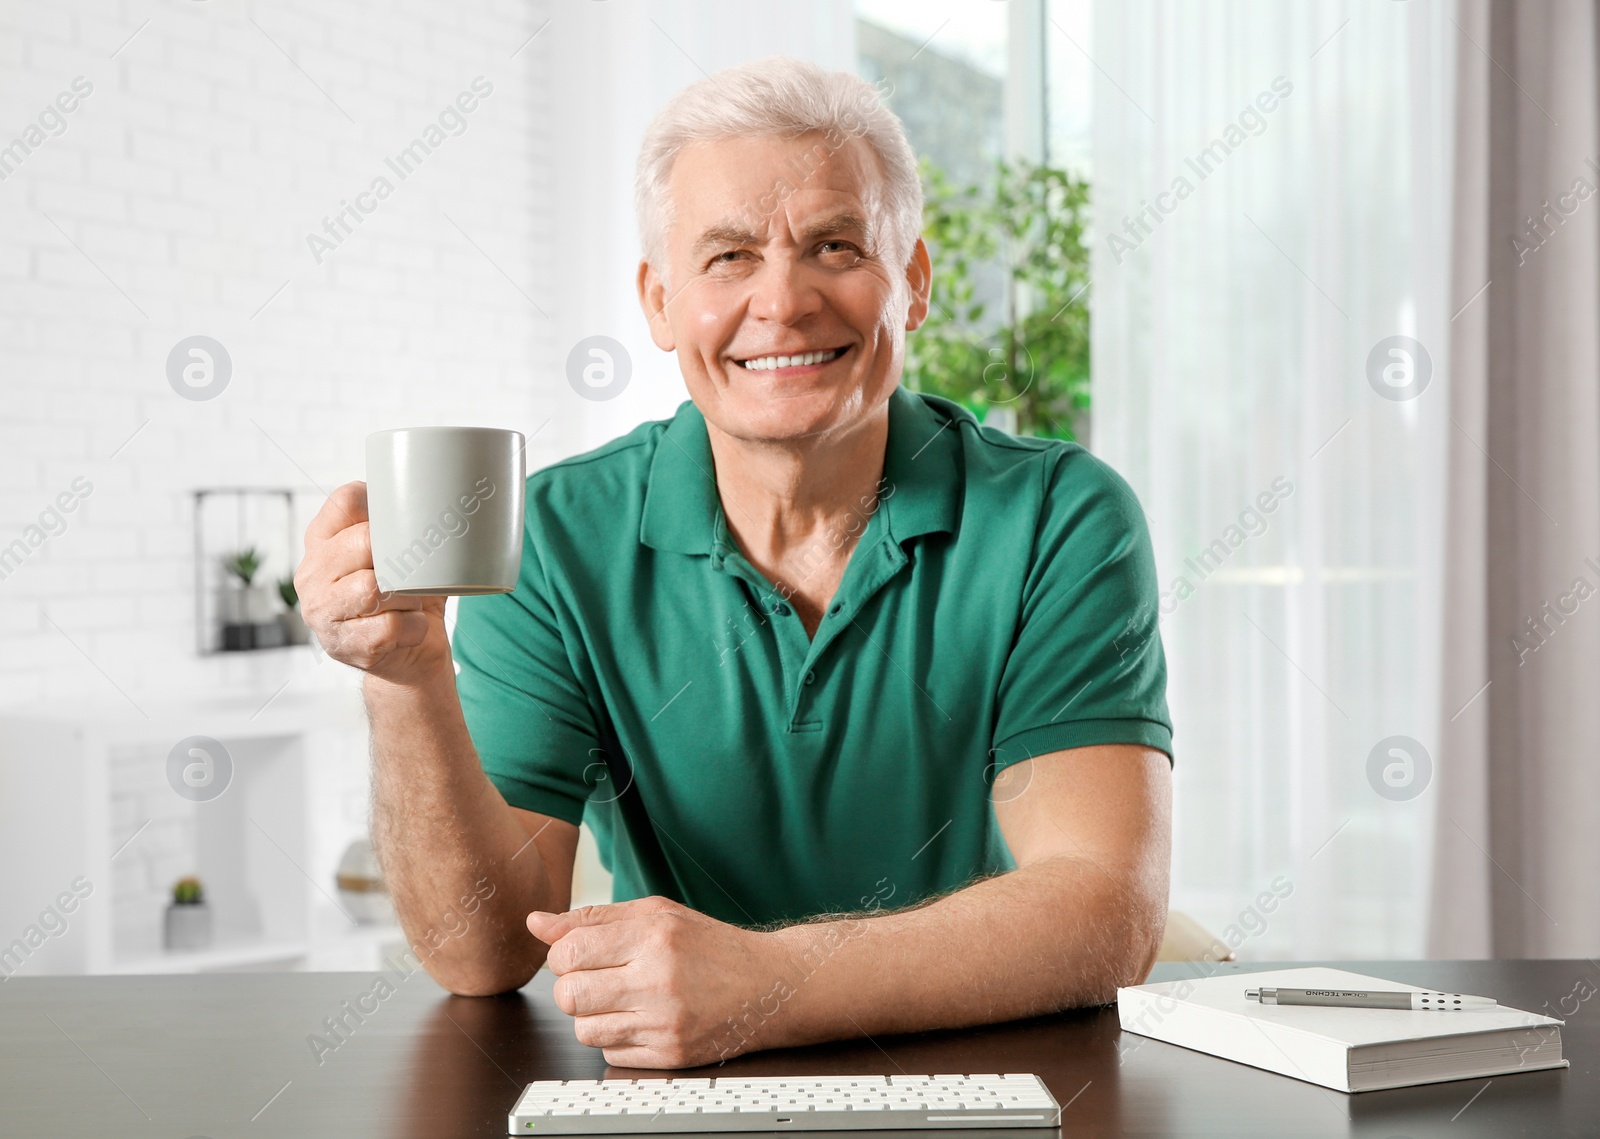 Photo of Mature man with drink using video chat at home, view from web camera